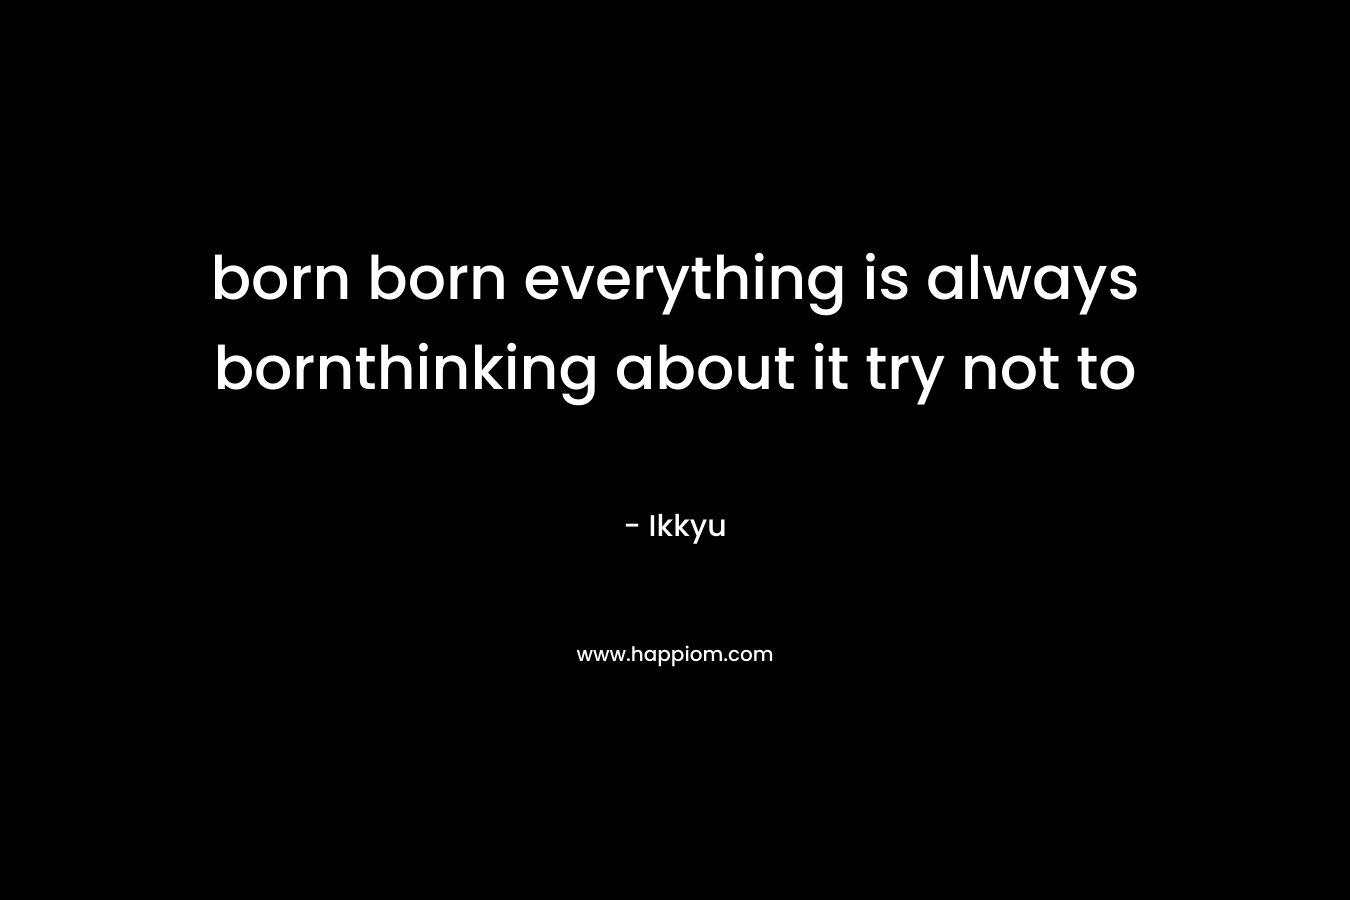 born born everything is always bornthinking about it try not to – Ikkyu